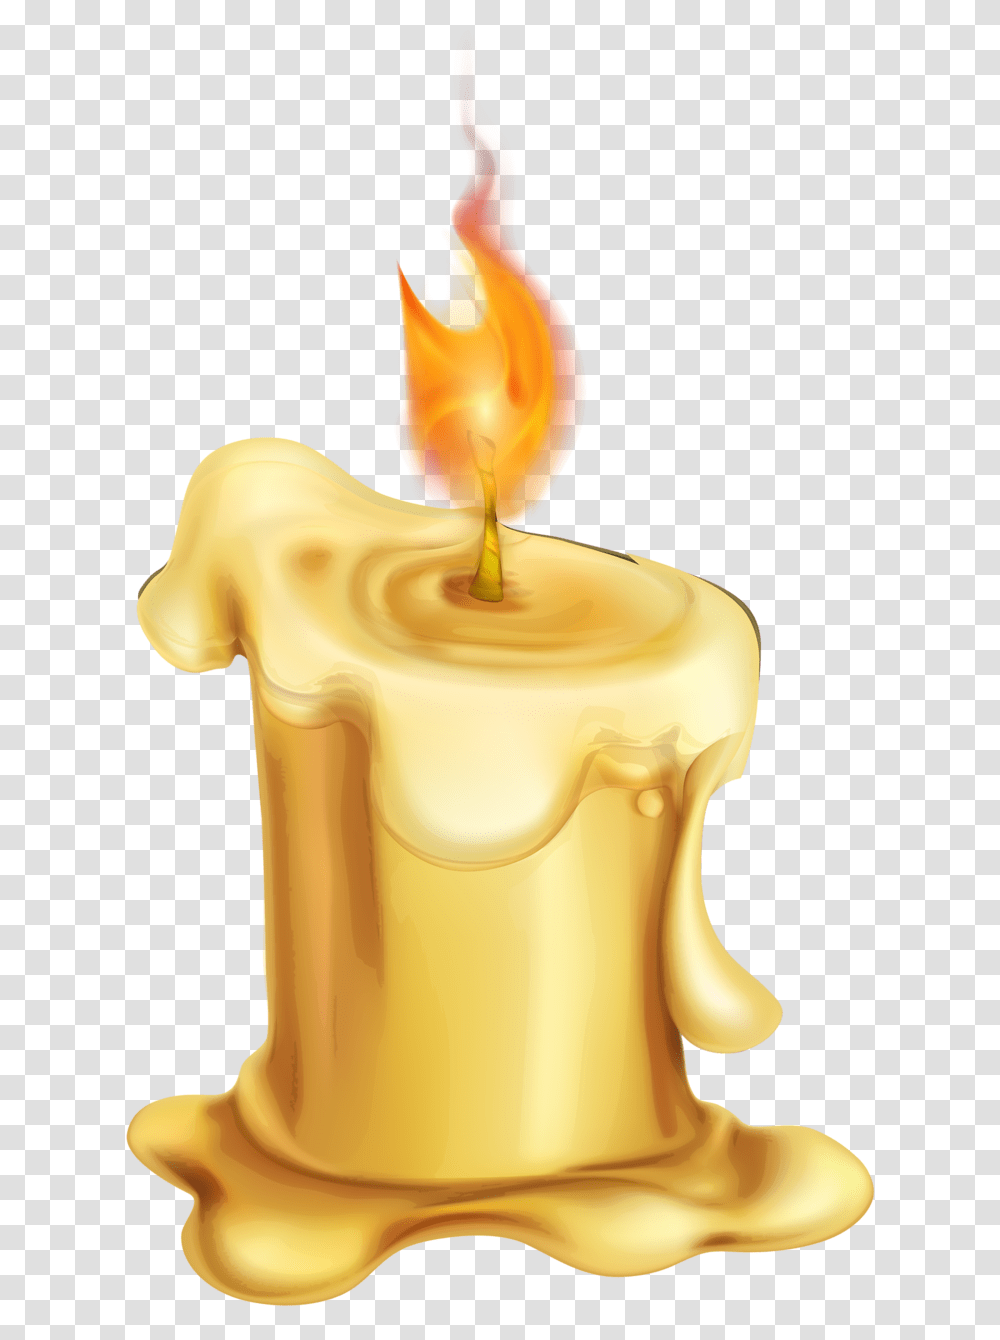 Candle Cartoon Wax Background Candle Clipart, Fire, Flame Transparent Png